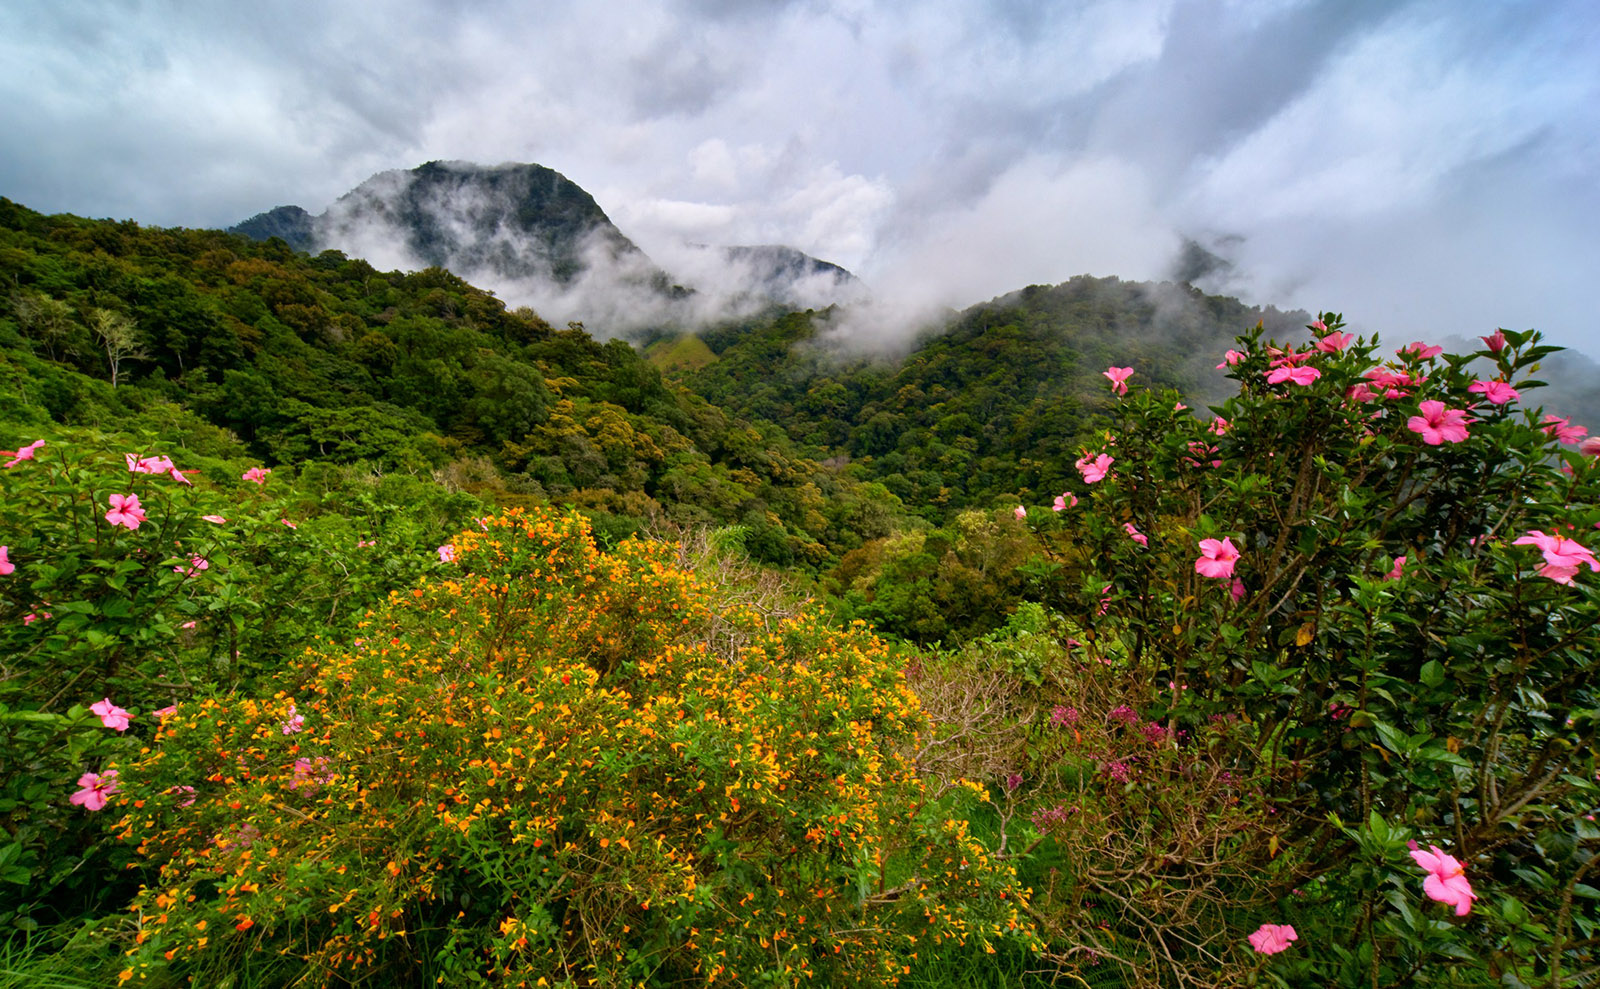 mountain shrouded in mist in the background with yellow and pink flowers in the foreground